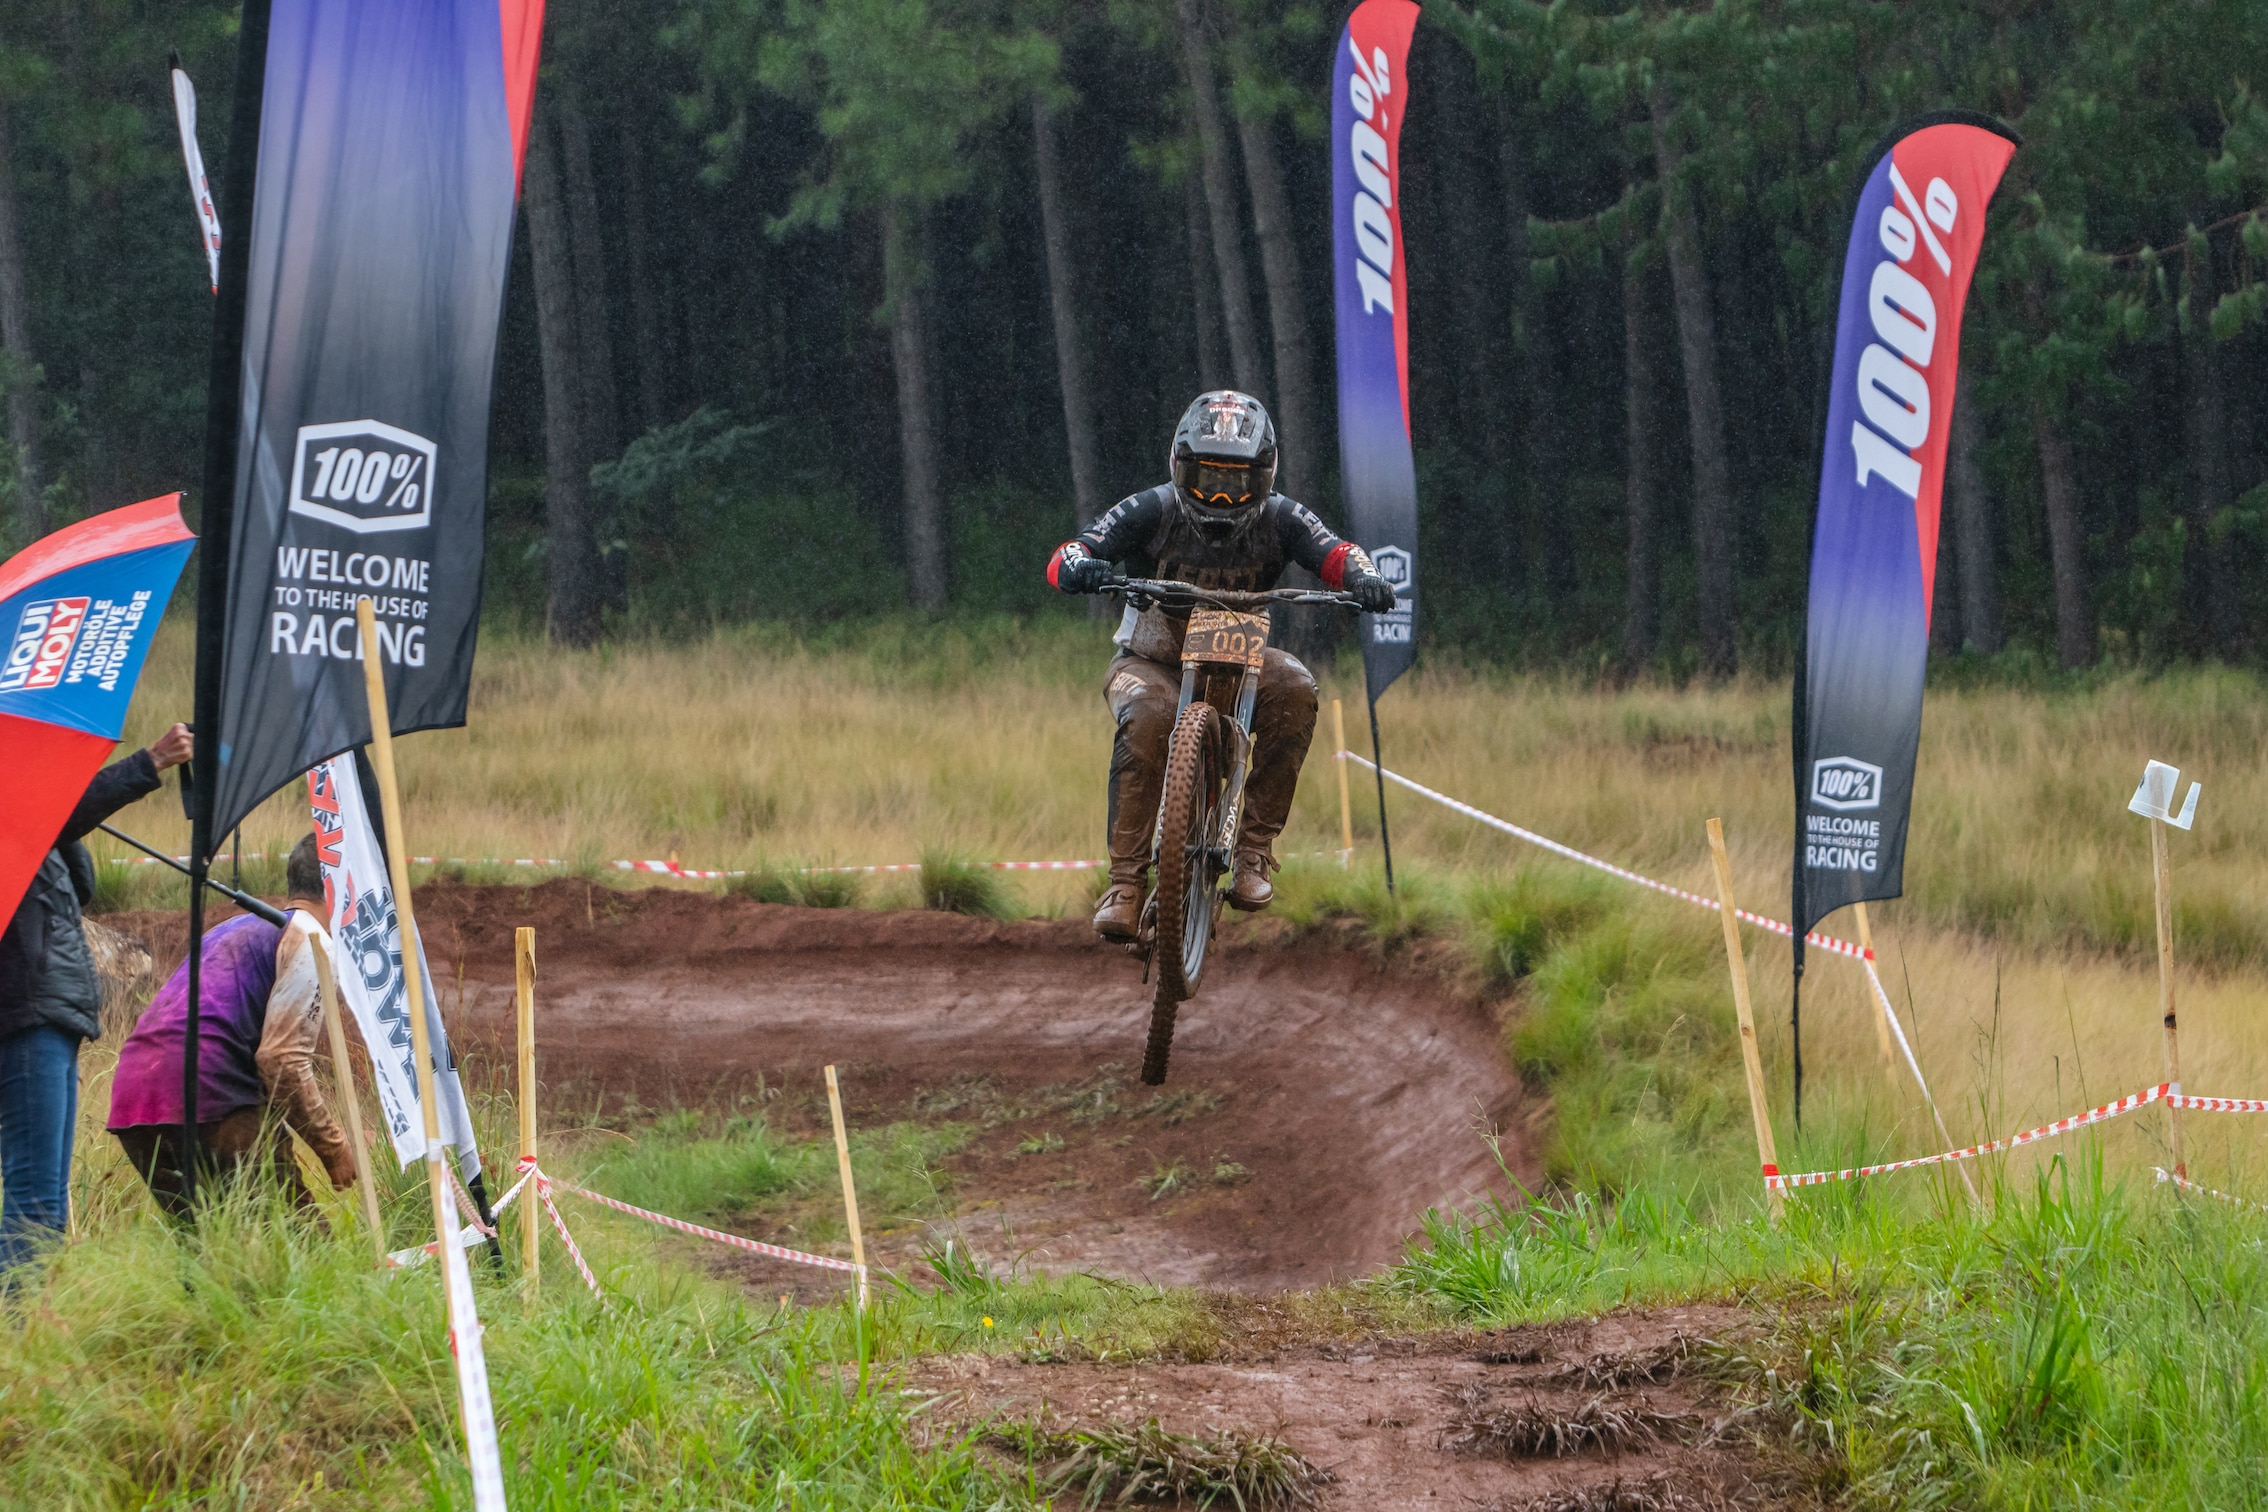 2023 National downhill champs South Africa was slippery in Sabie